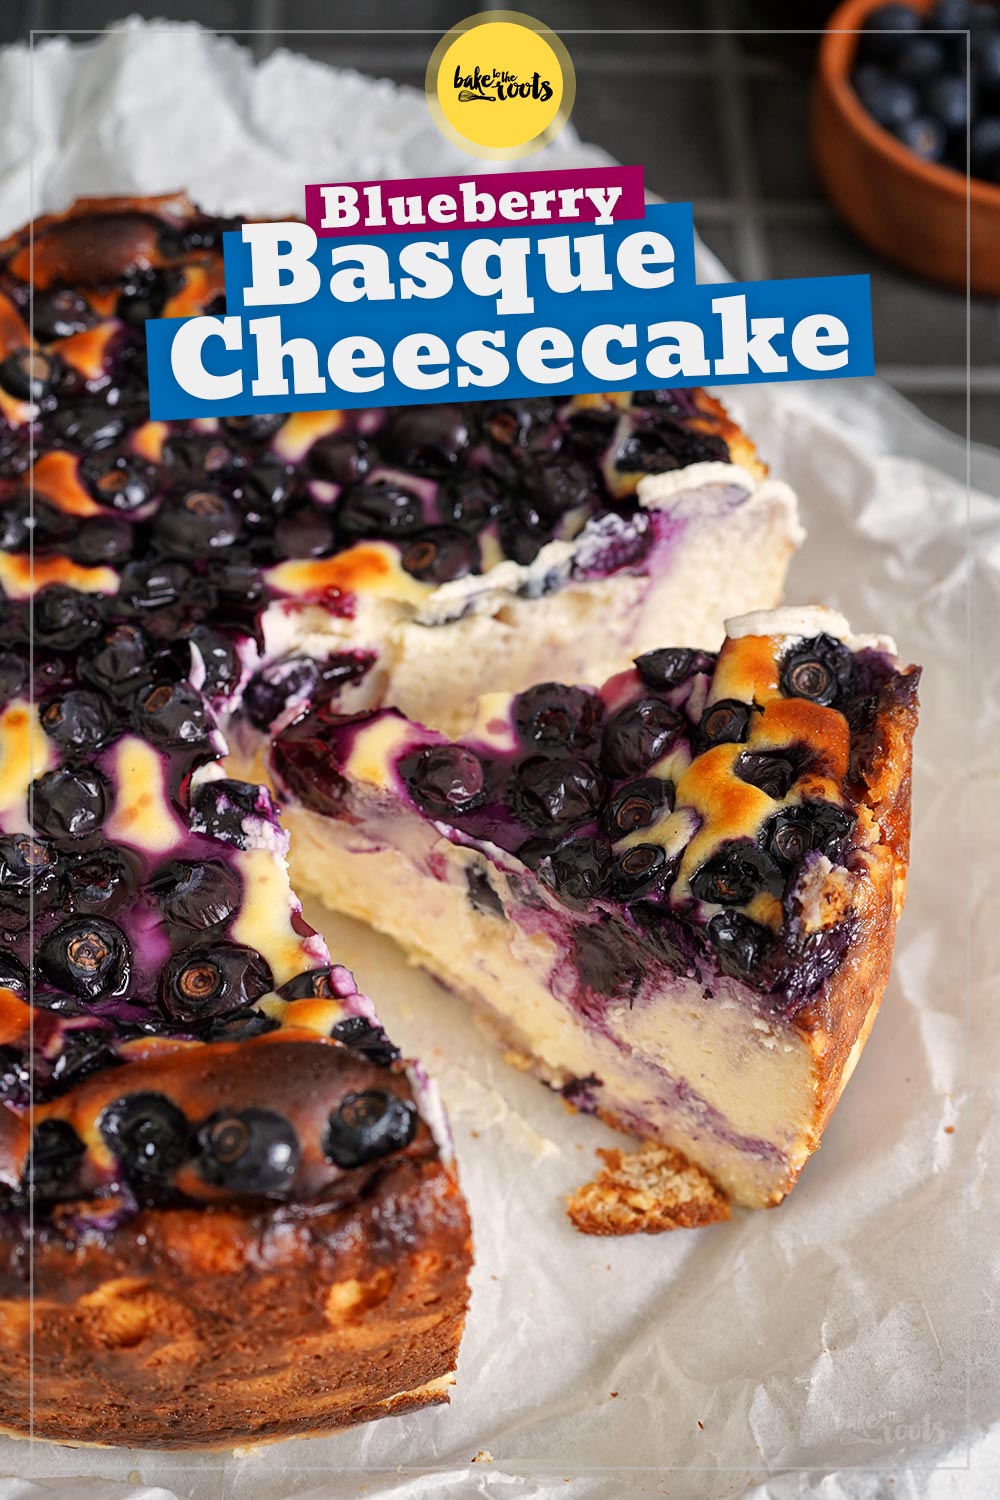 Blueberry Basque Cheesecake | Bake to the roots